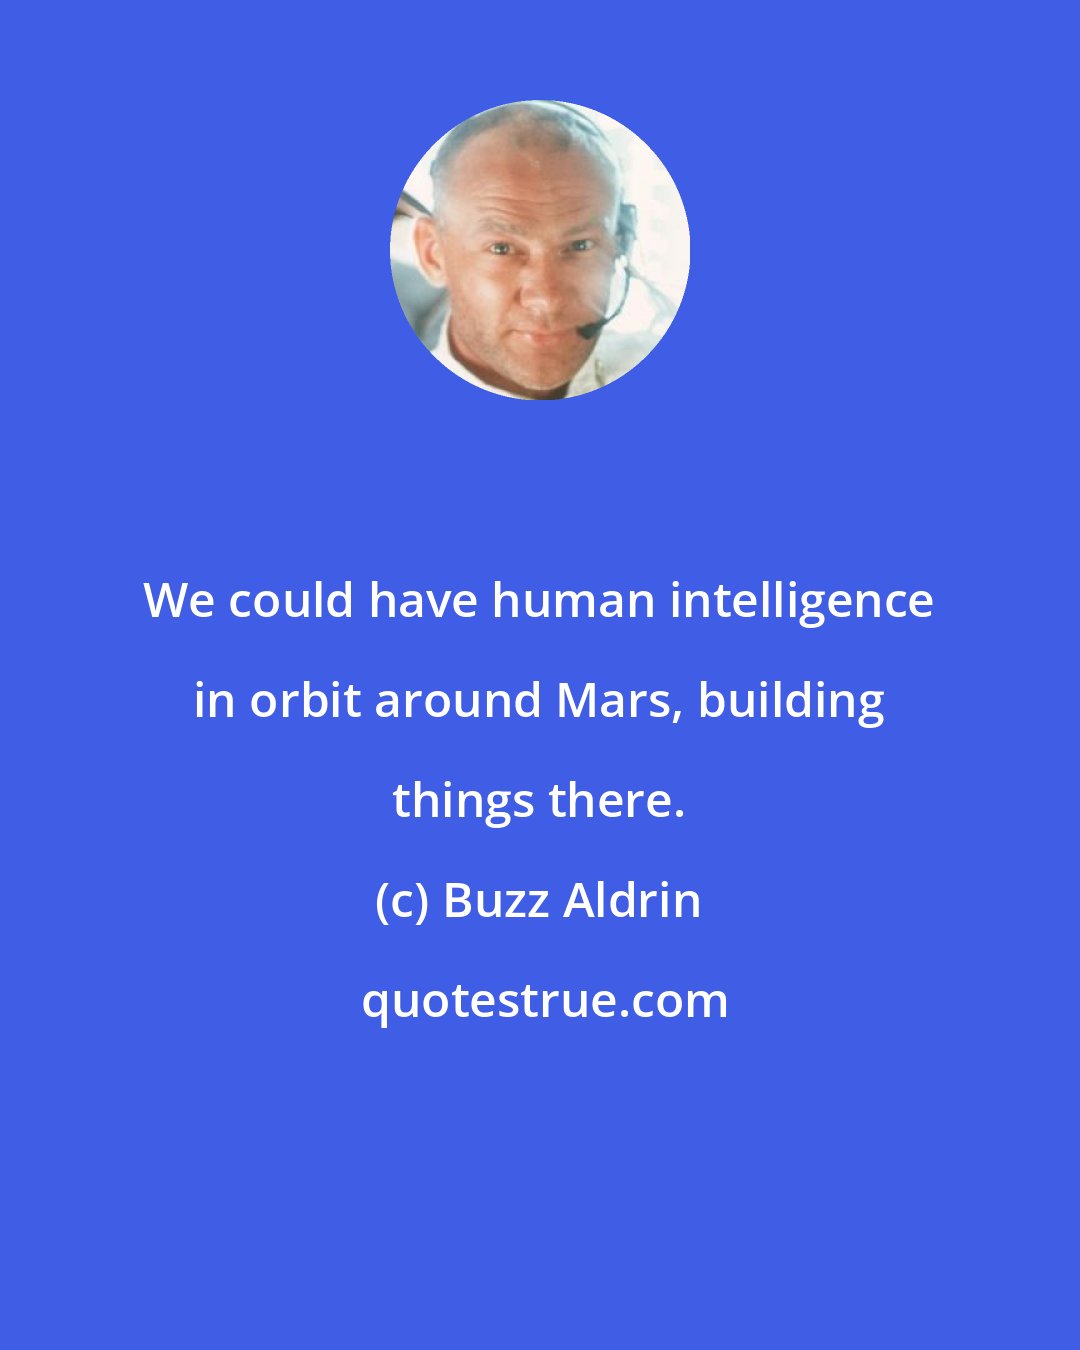 Buzz Aldrin: We could have human intelligence in orbit around Mars, building things there.